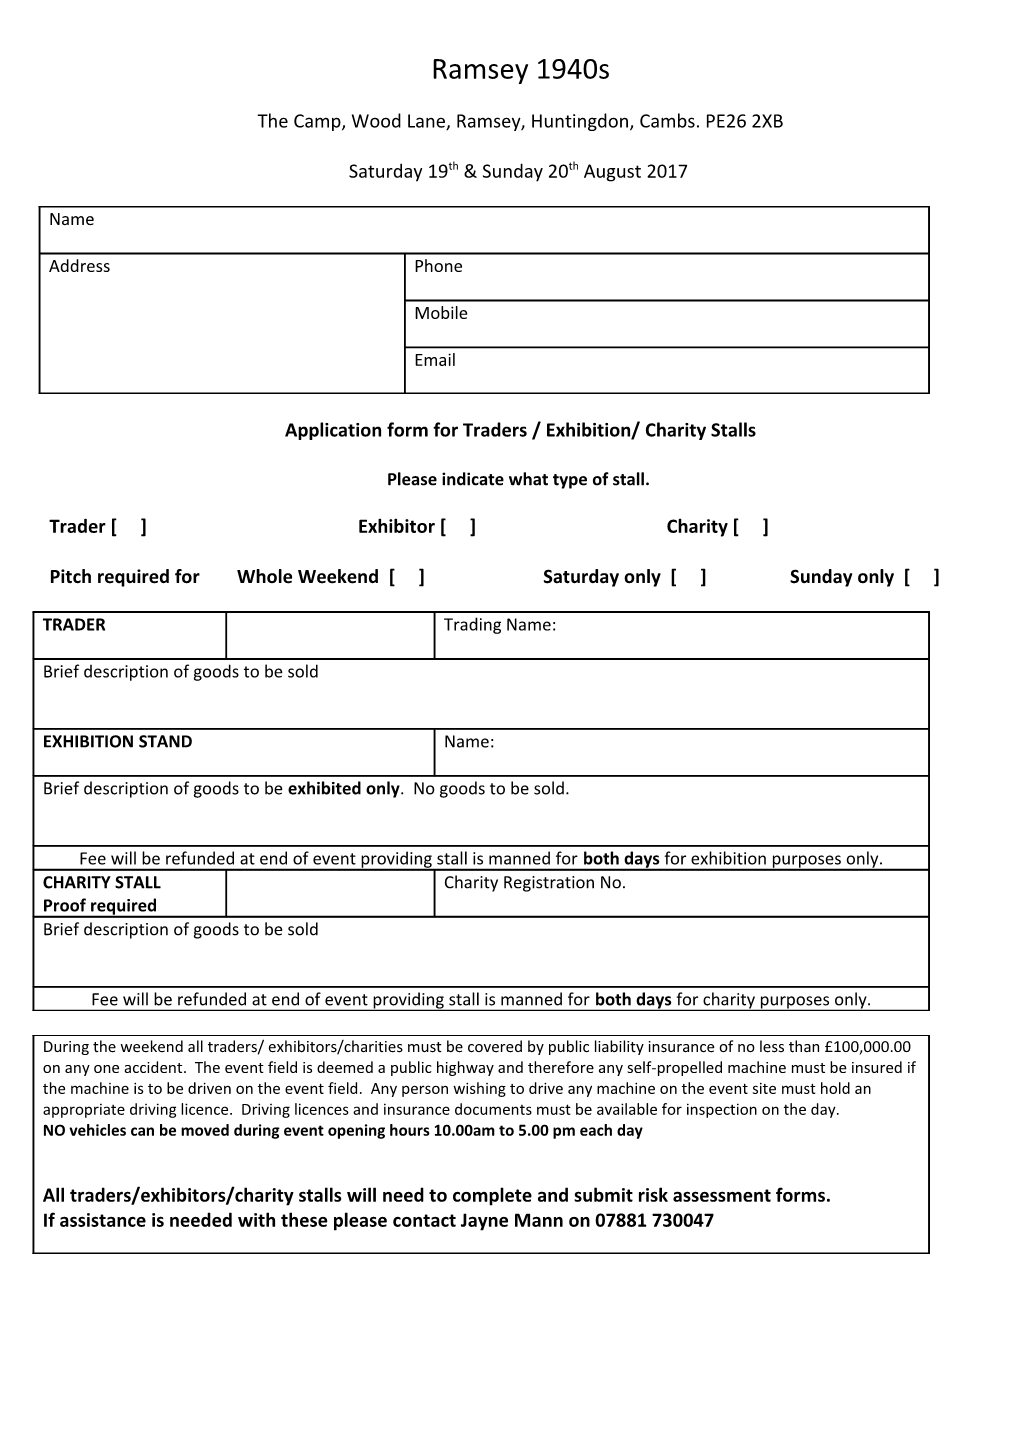 Application Form for Traders / Exhibition/ Charity Stalls